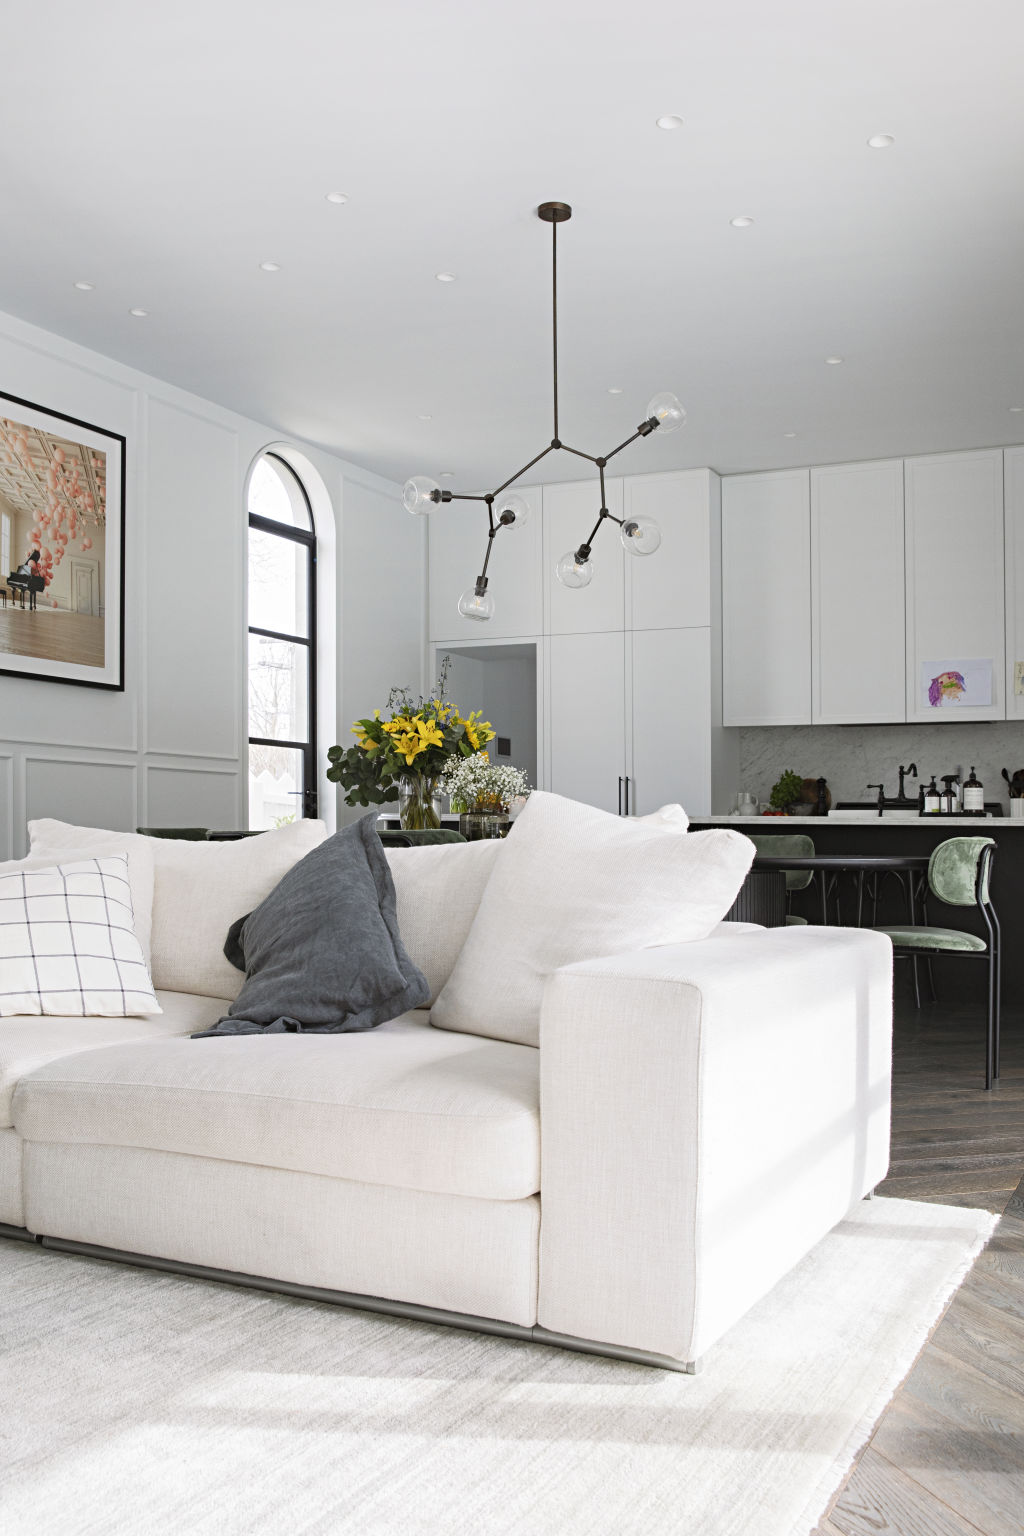 The couple spent five years planning their dream family home, turning to a Pinterest mood board to gather their ideas. Photo: Natalie Jeffcott